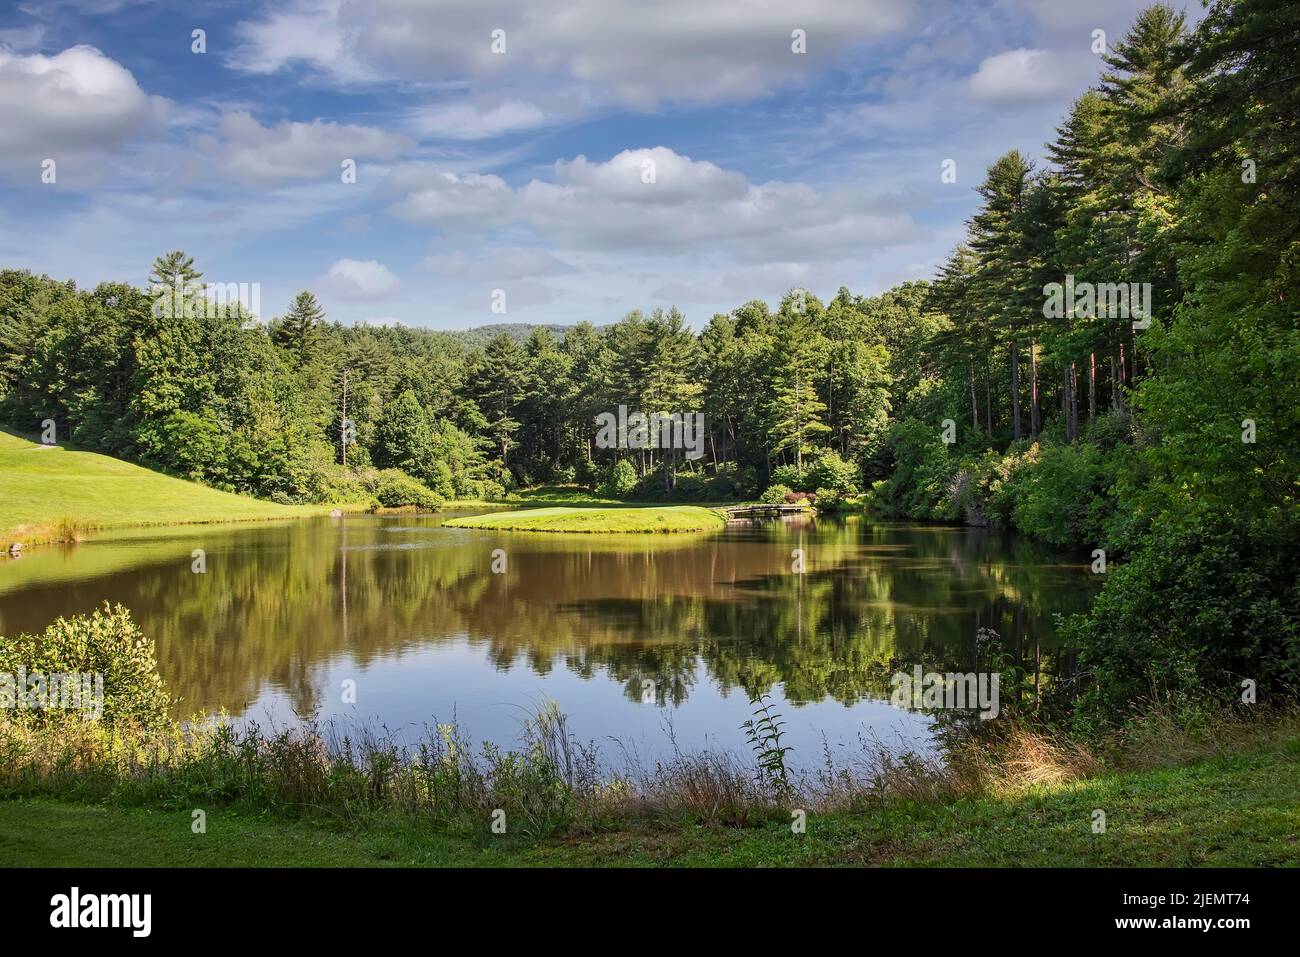 Scenic landscape of North Carolina with natural pond and forests. Stock Photo